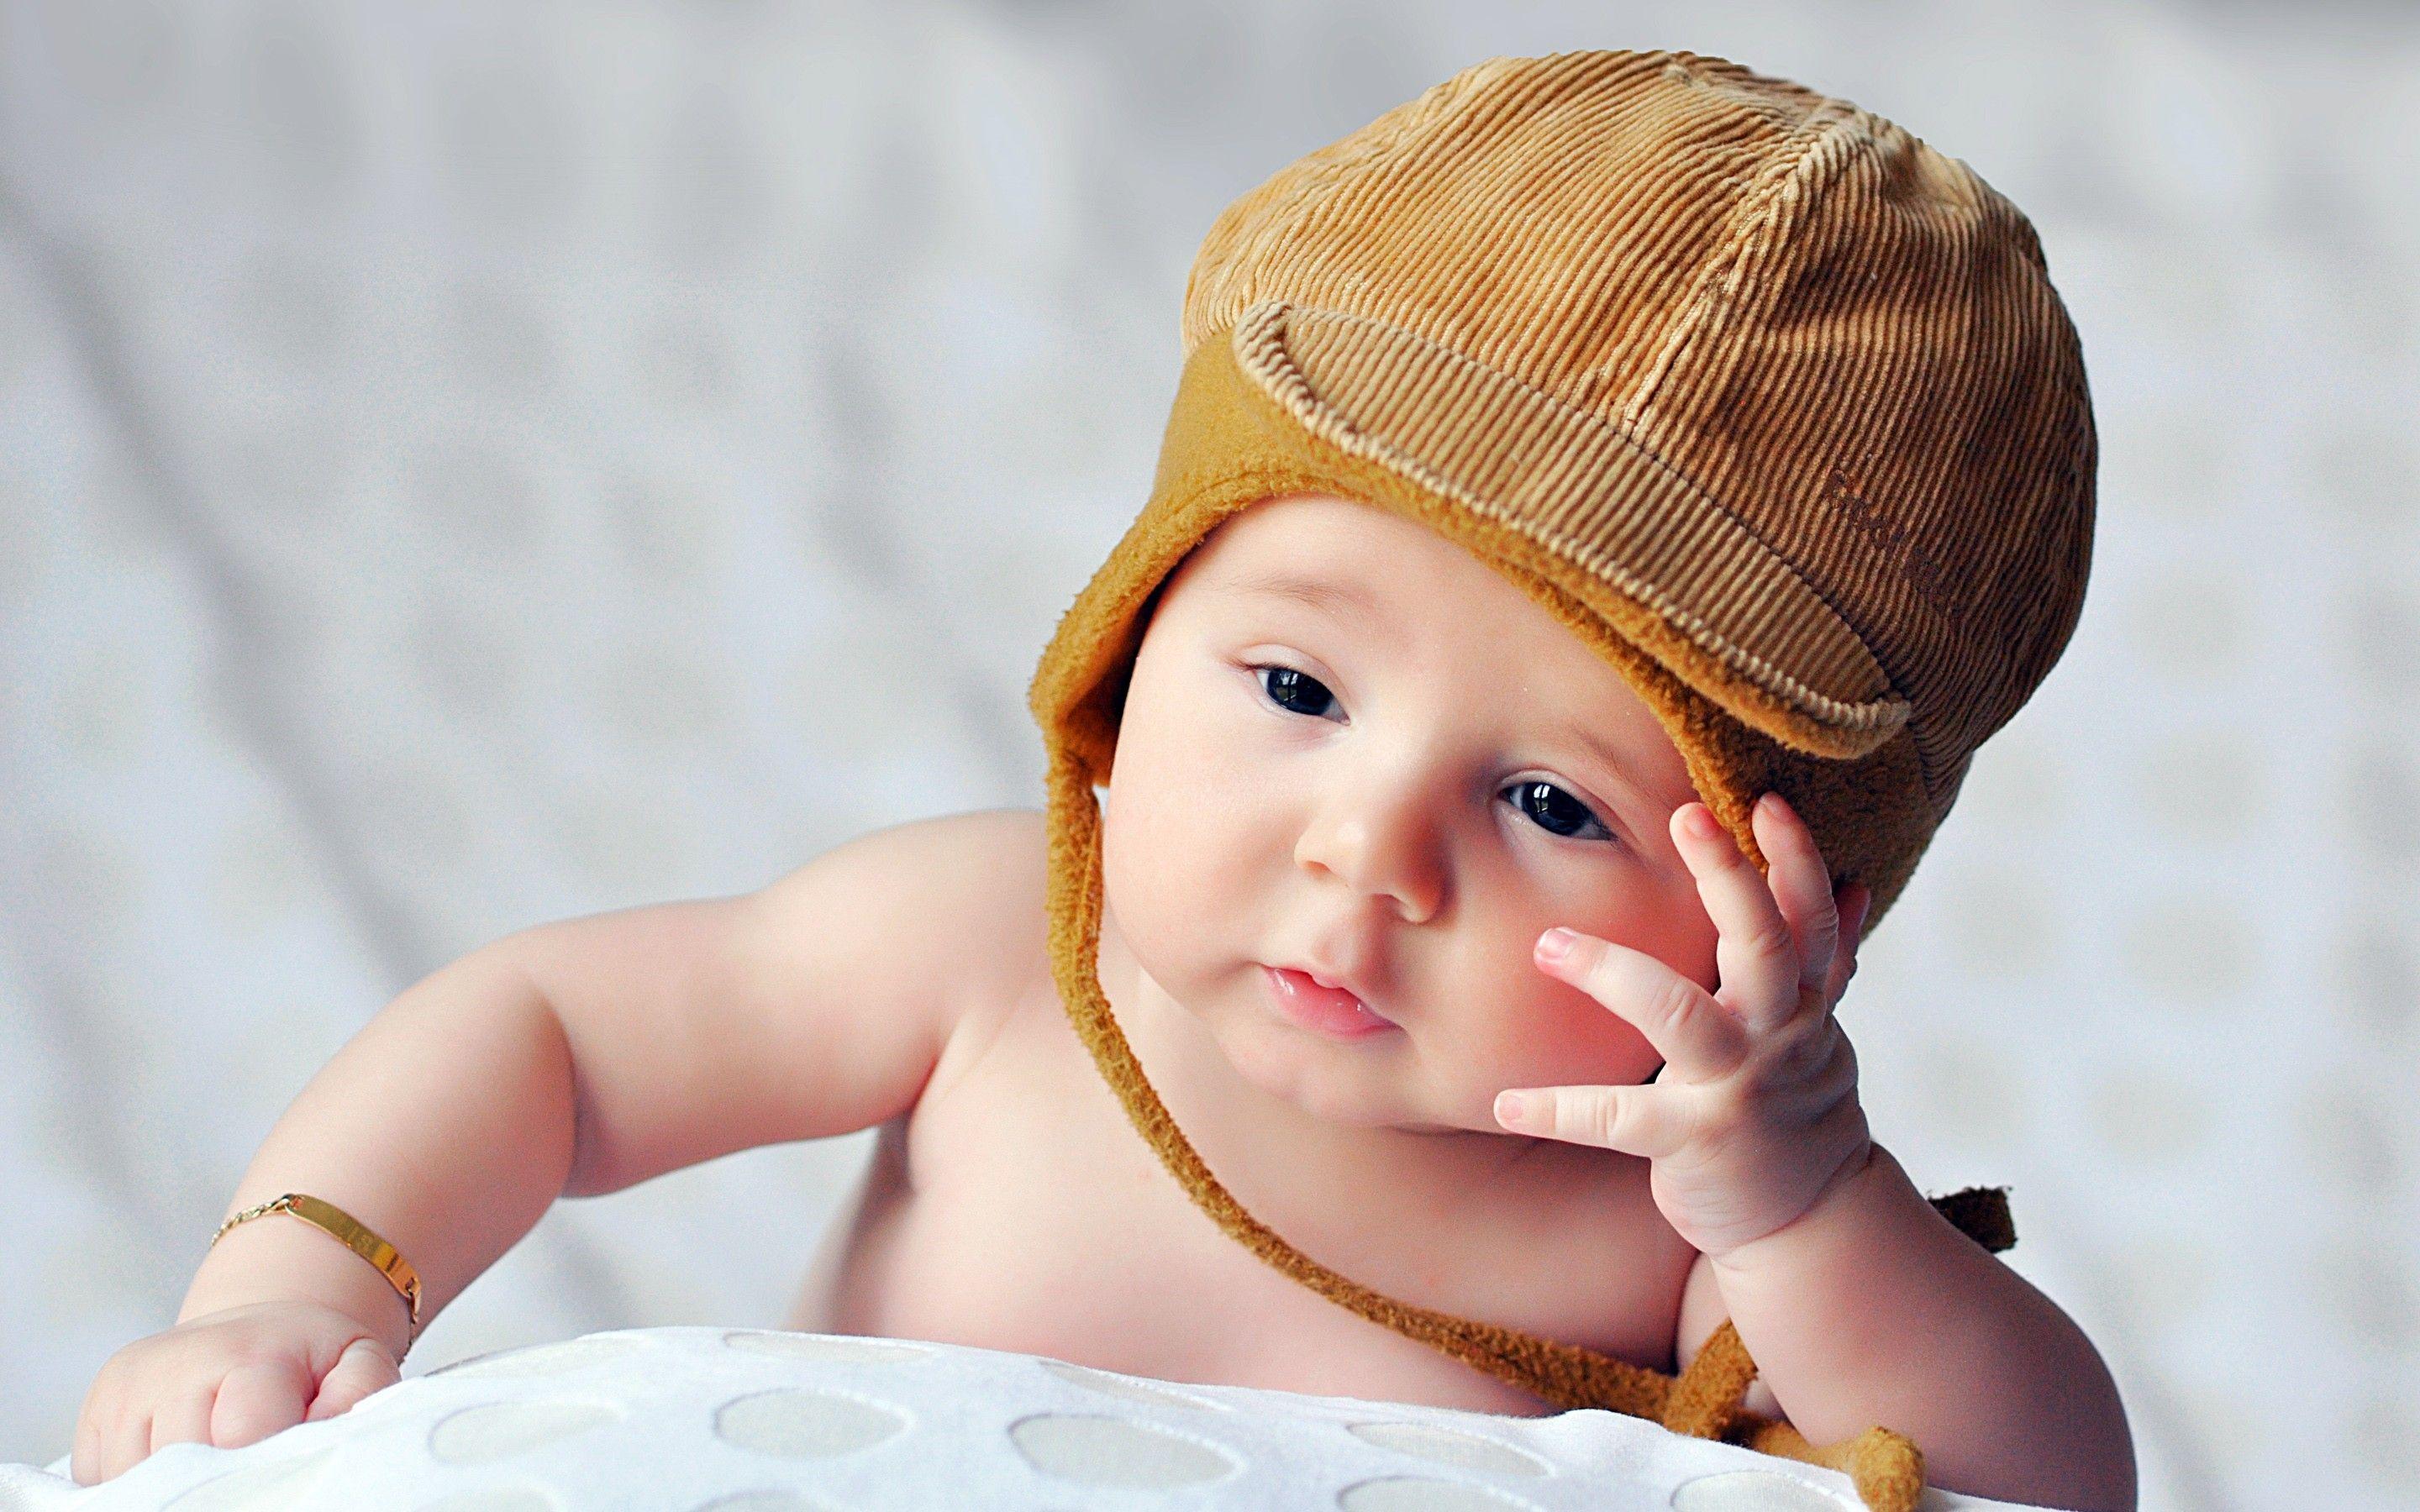 Chilled Cute HD Desktop Wallpaper Cool Wallpaper. Cute baby wallpaper, Cute baby boy picture, Cute baby picture